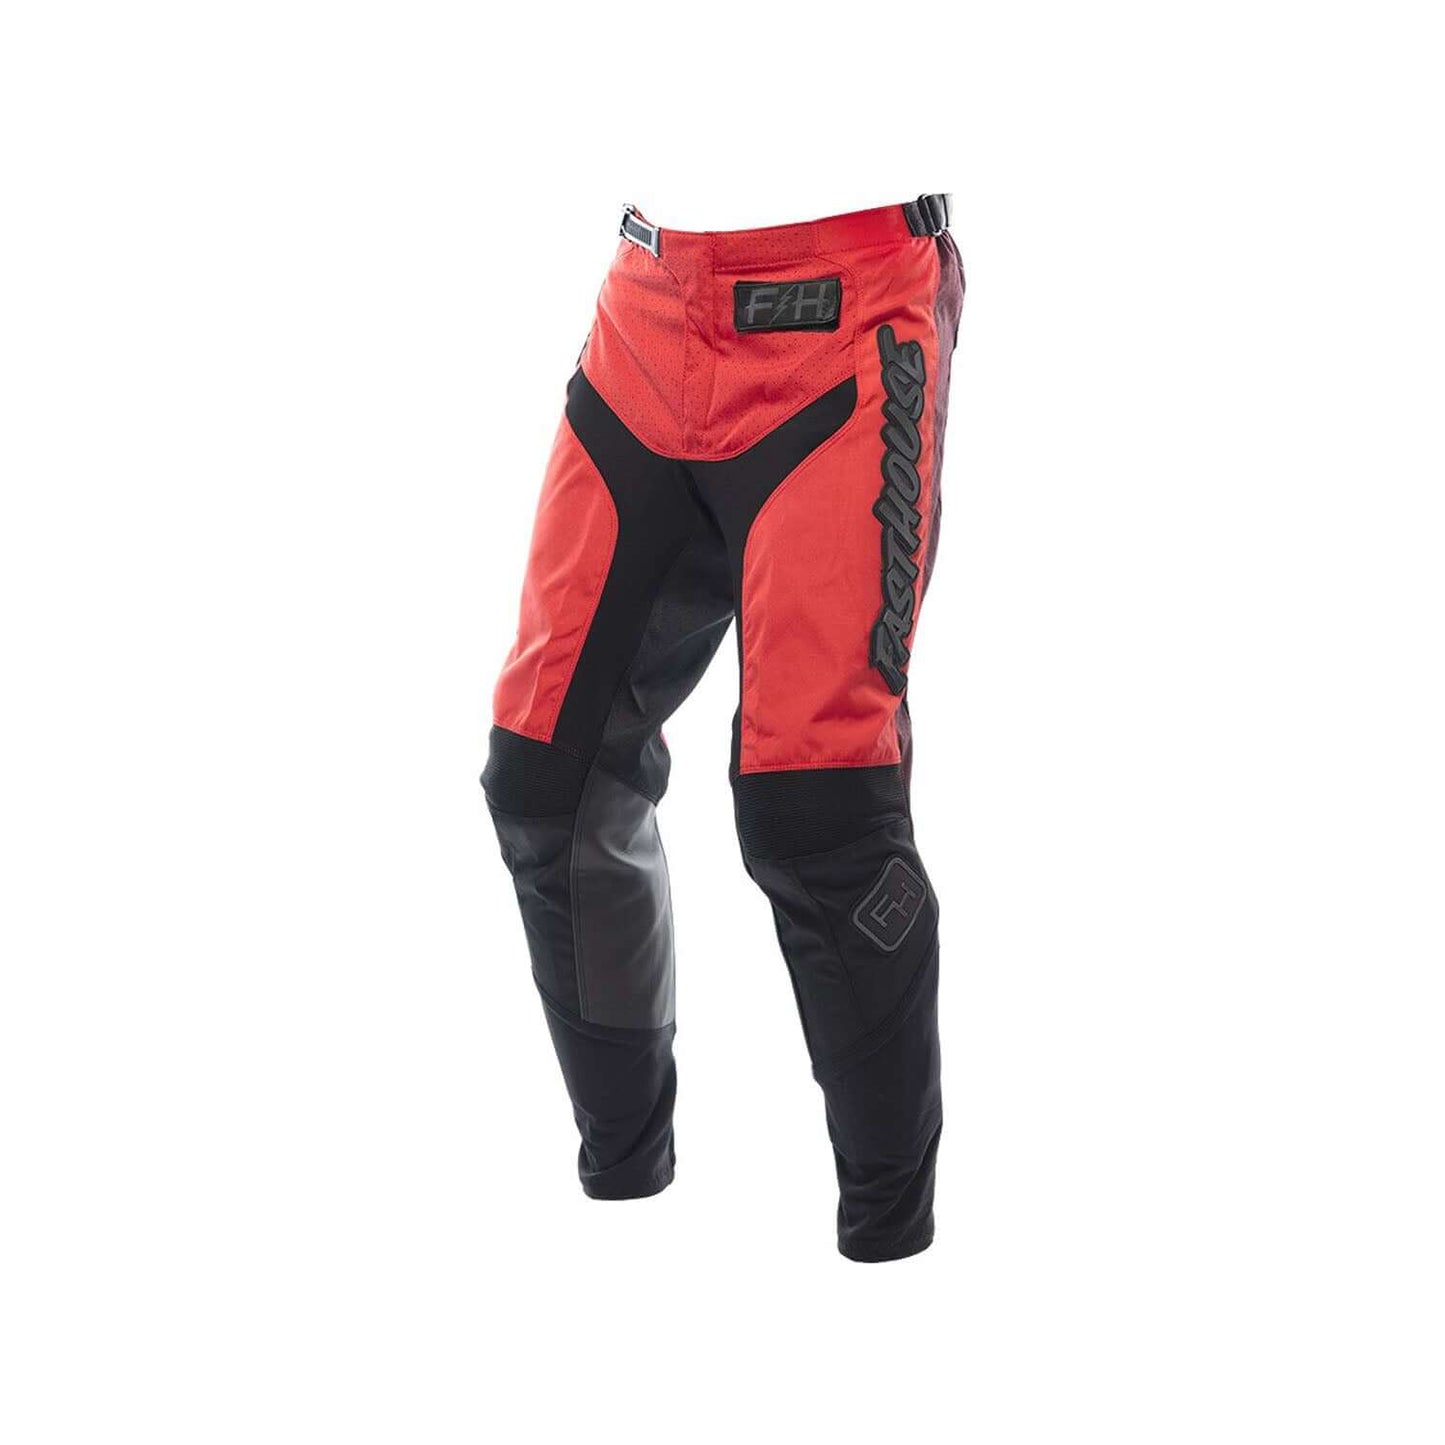 Fasthouse Youth Grindhouse Pants Red/Black Bike Pants